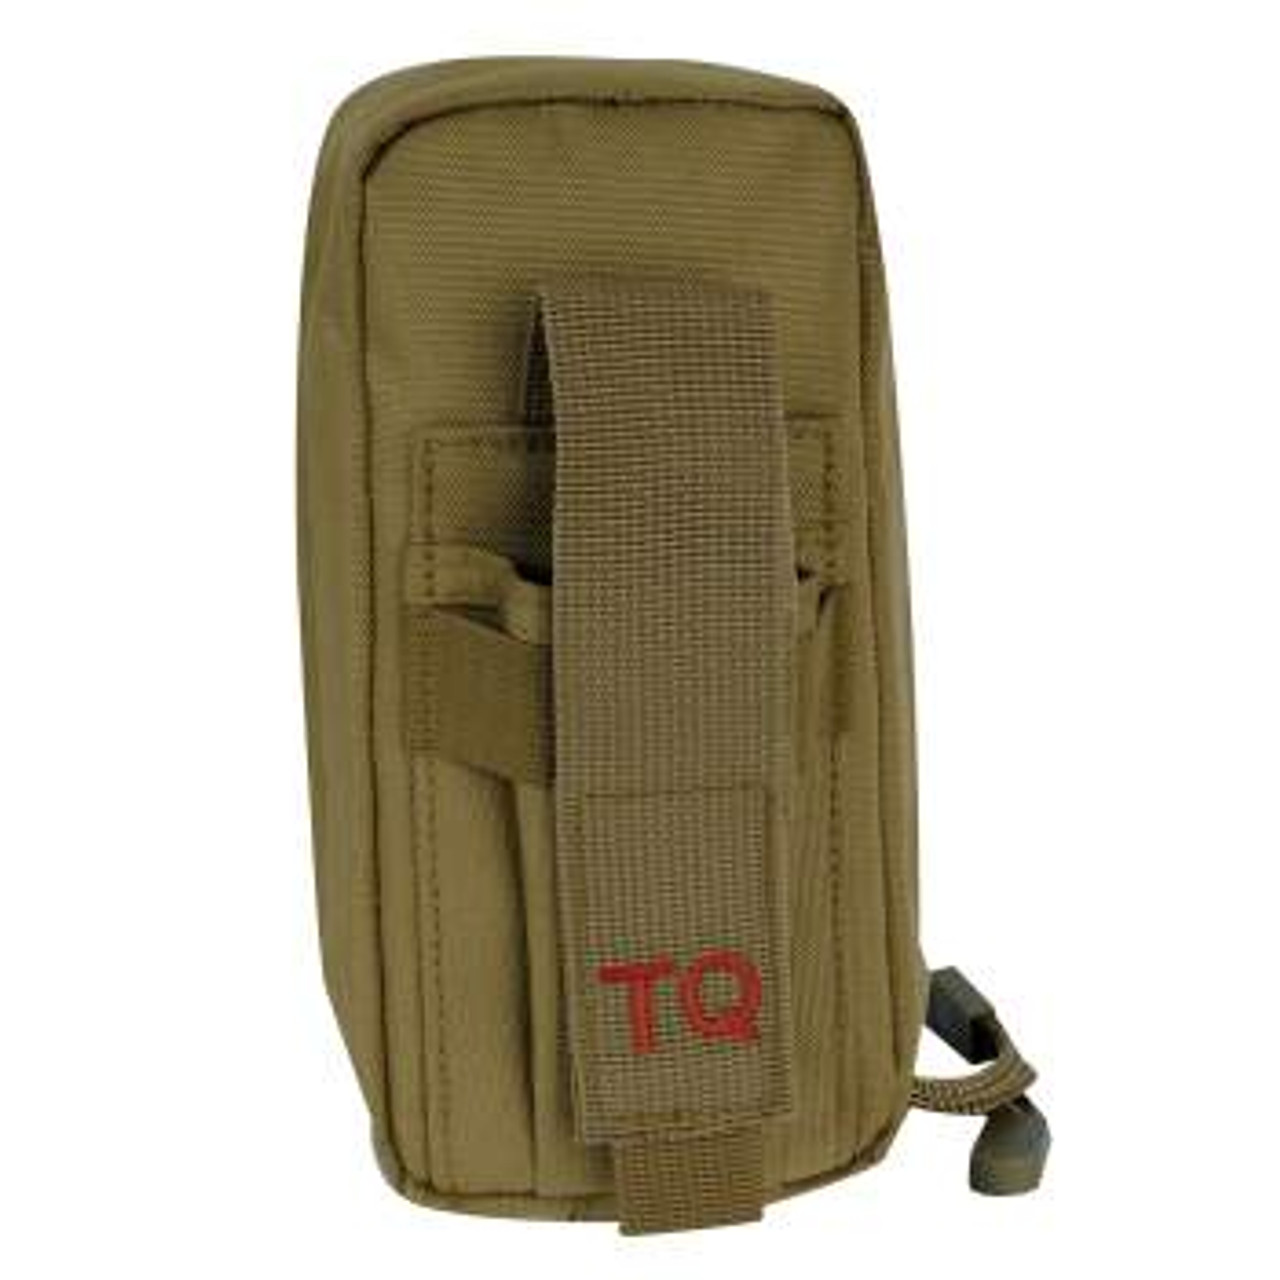 Rothco Fast Action First Aid Tourniquet Pouch, Coyote Tan